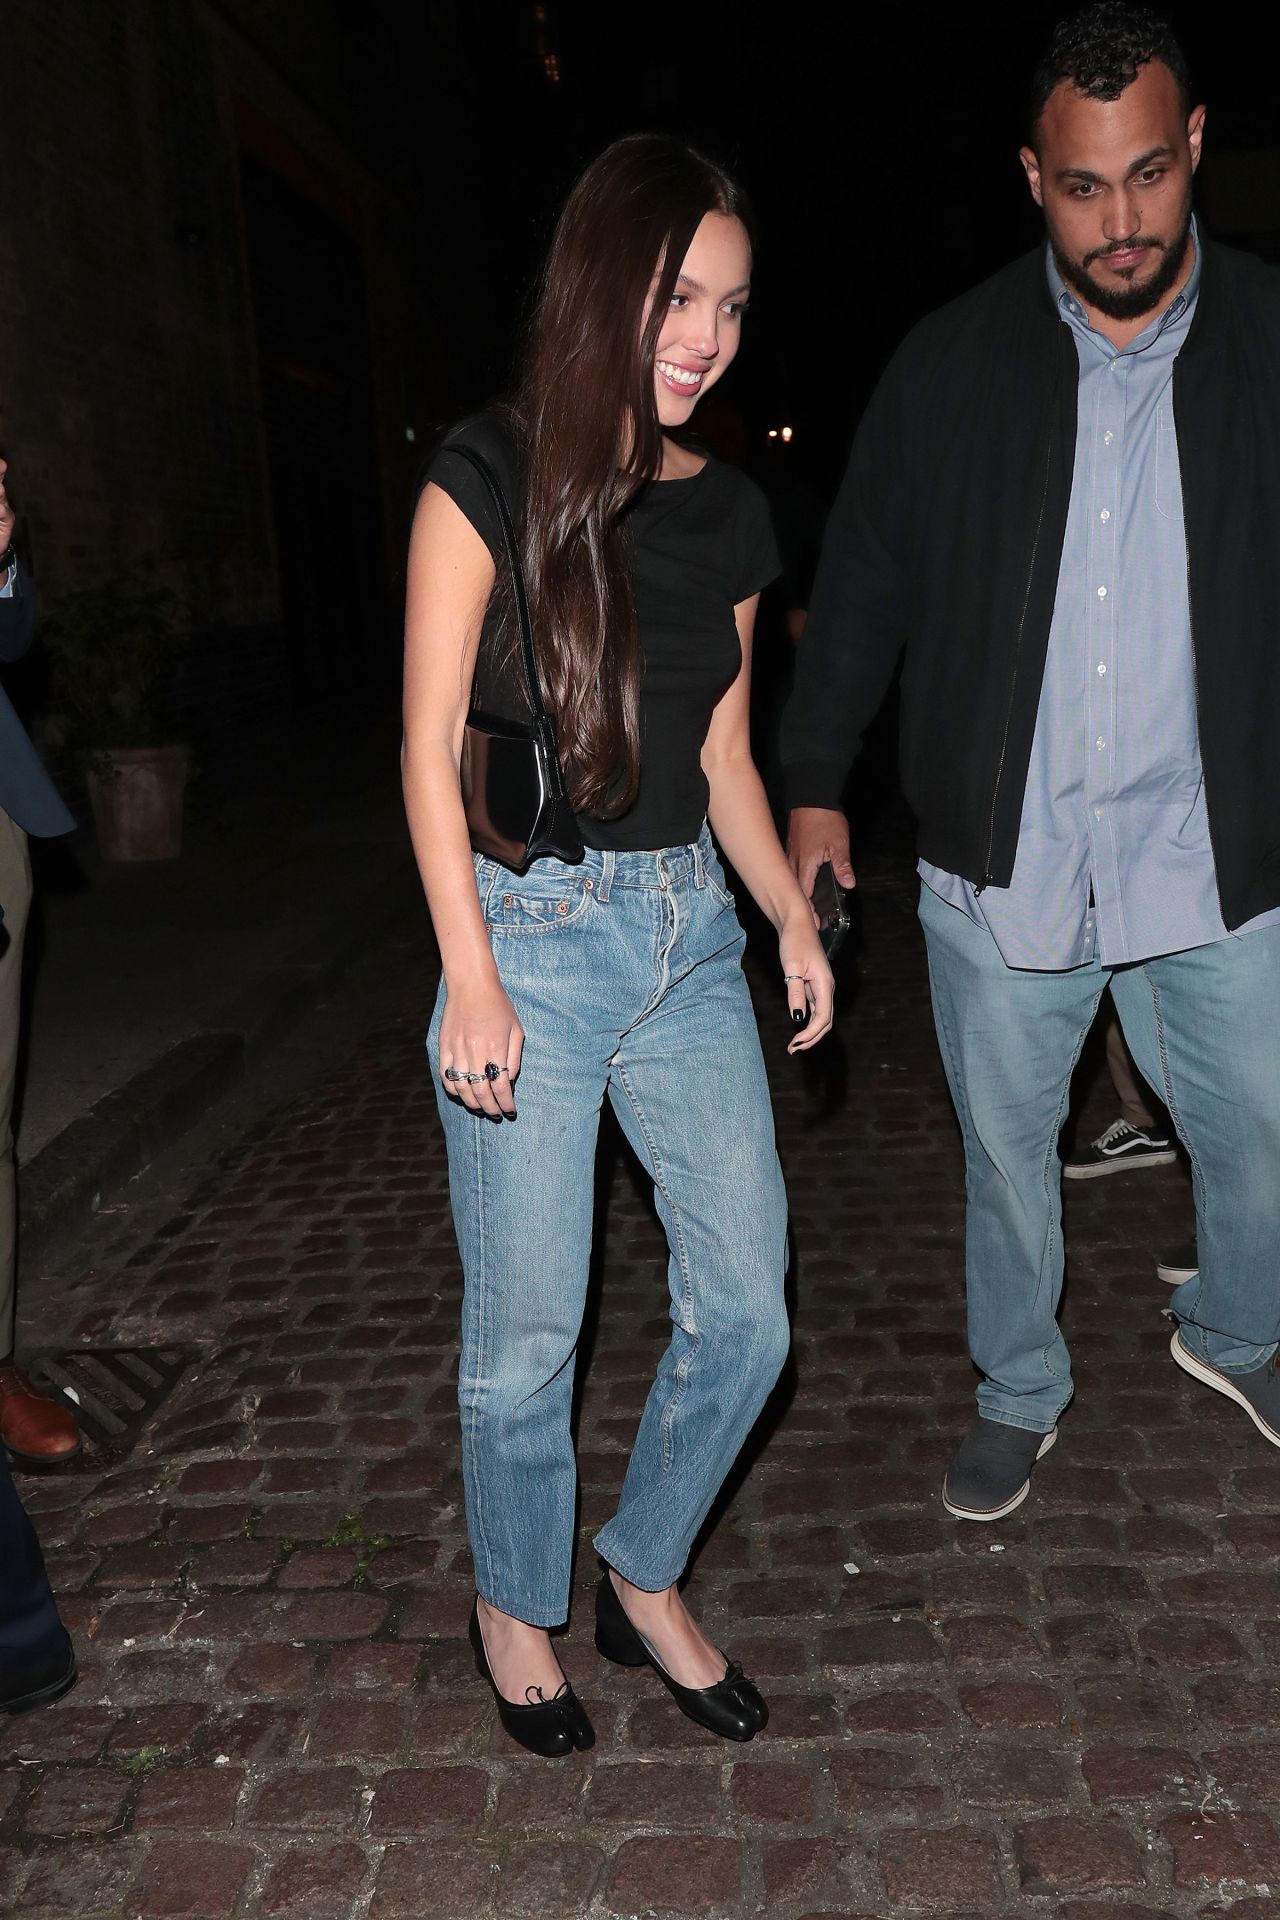 LONDON, UK - AUGUST 14: Olivia Rodrigo is seen leaving Chiltern Fire Station for a night out on August 14, 2023 in London, UK.  (Photo credit: Ricky Vigil M/Justin E Palmer/GC Images)